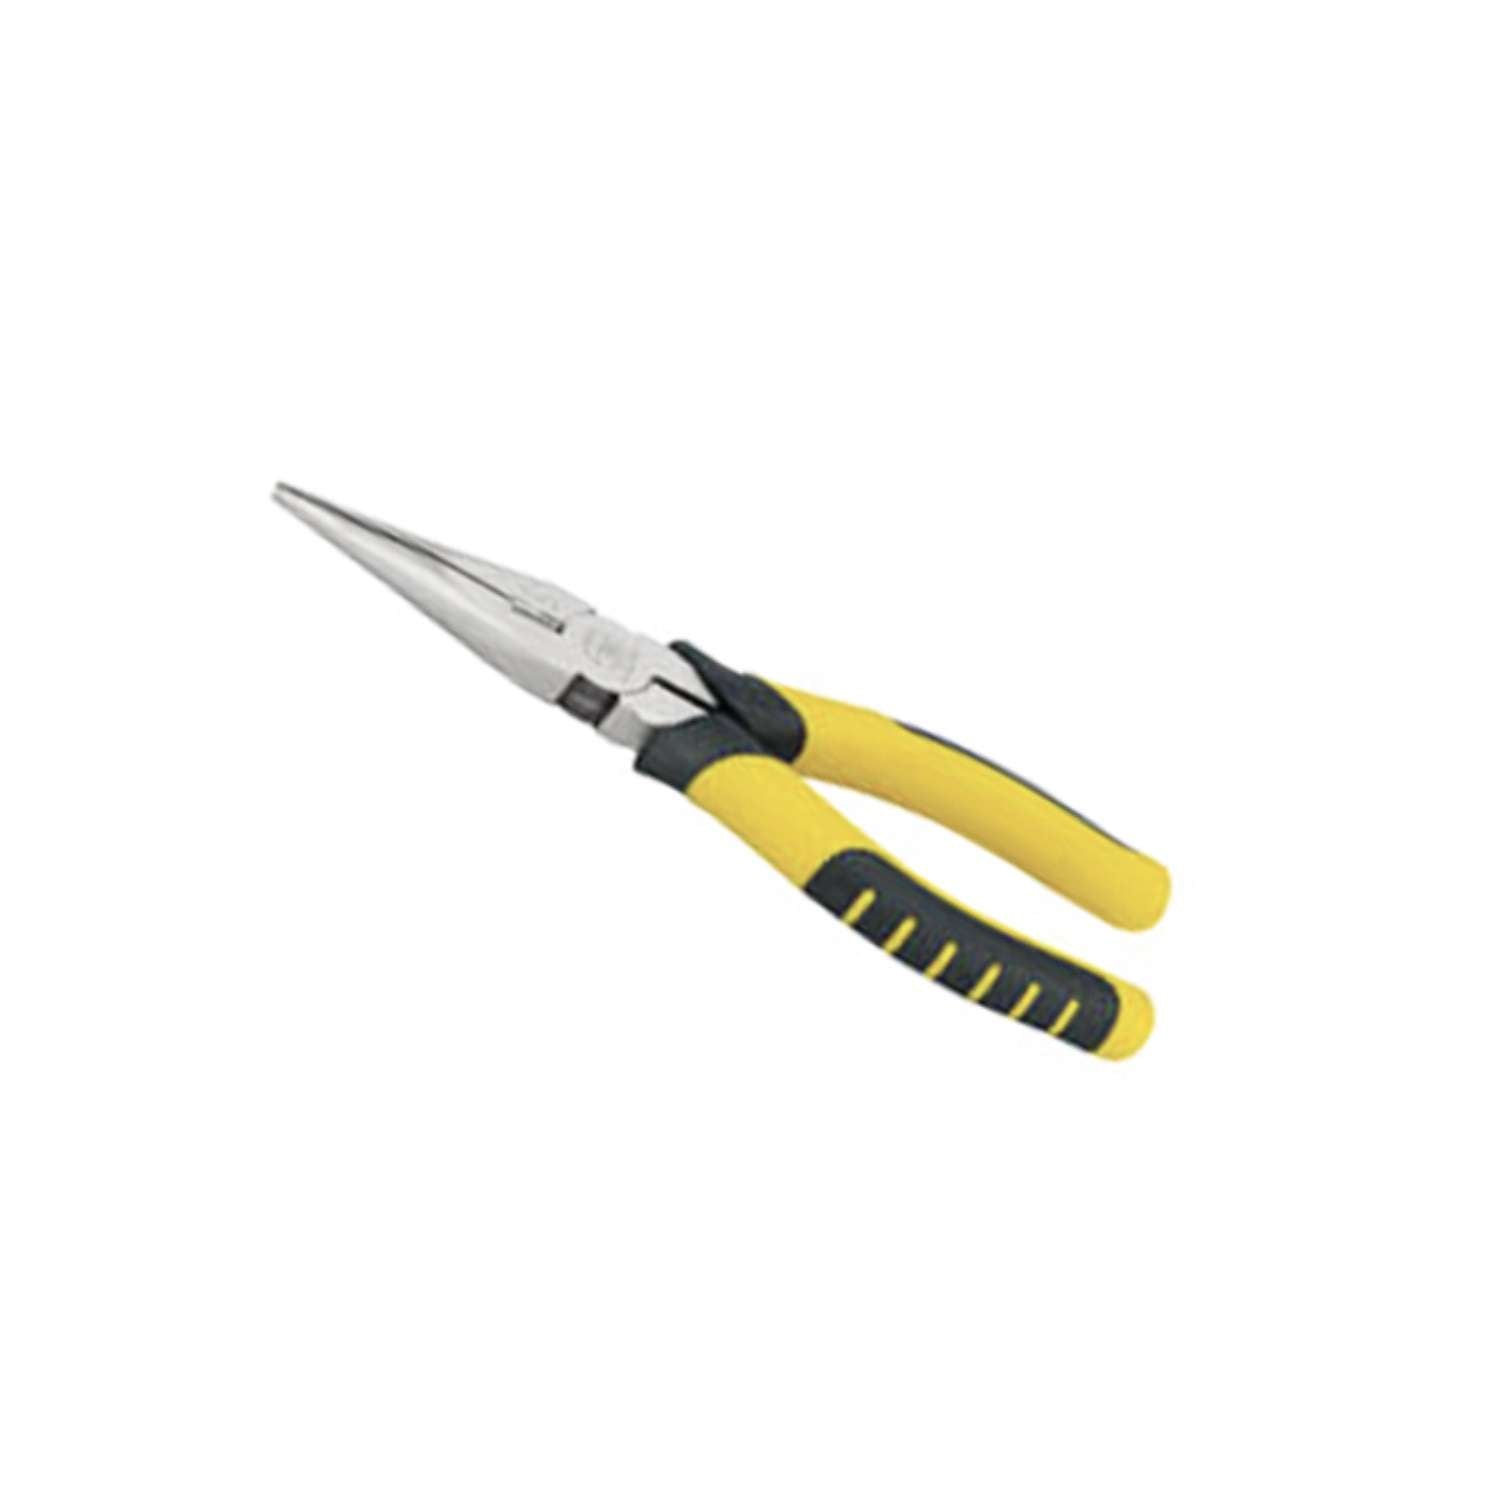 Snipe nose pliers steel 160 - 200 mm professional - FI 40 00(13-14)